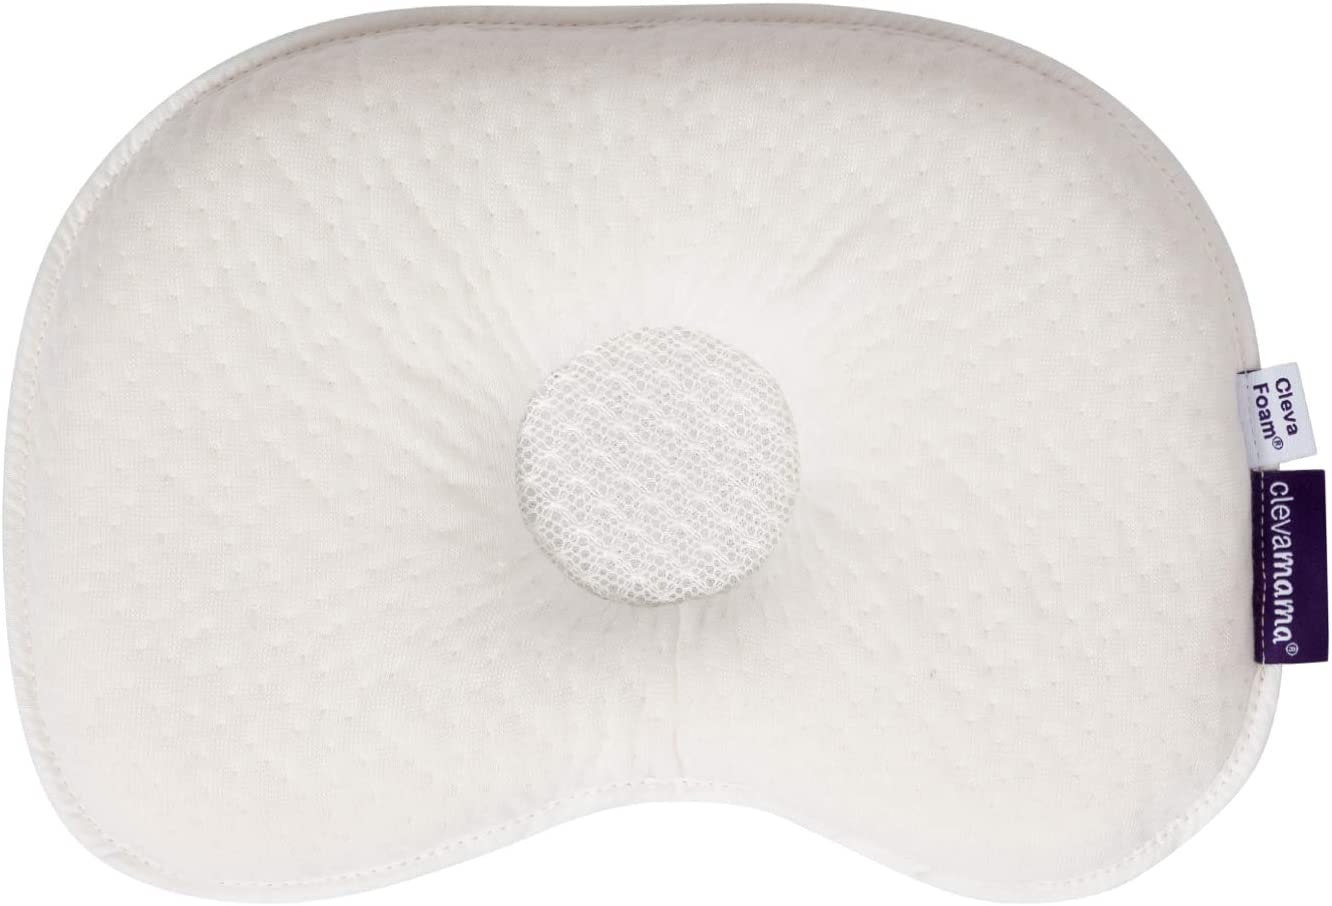 ClevaFoam Infant Pillow by Clevamama.